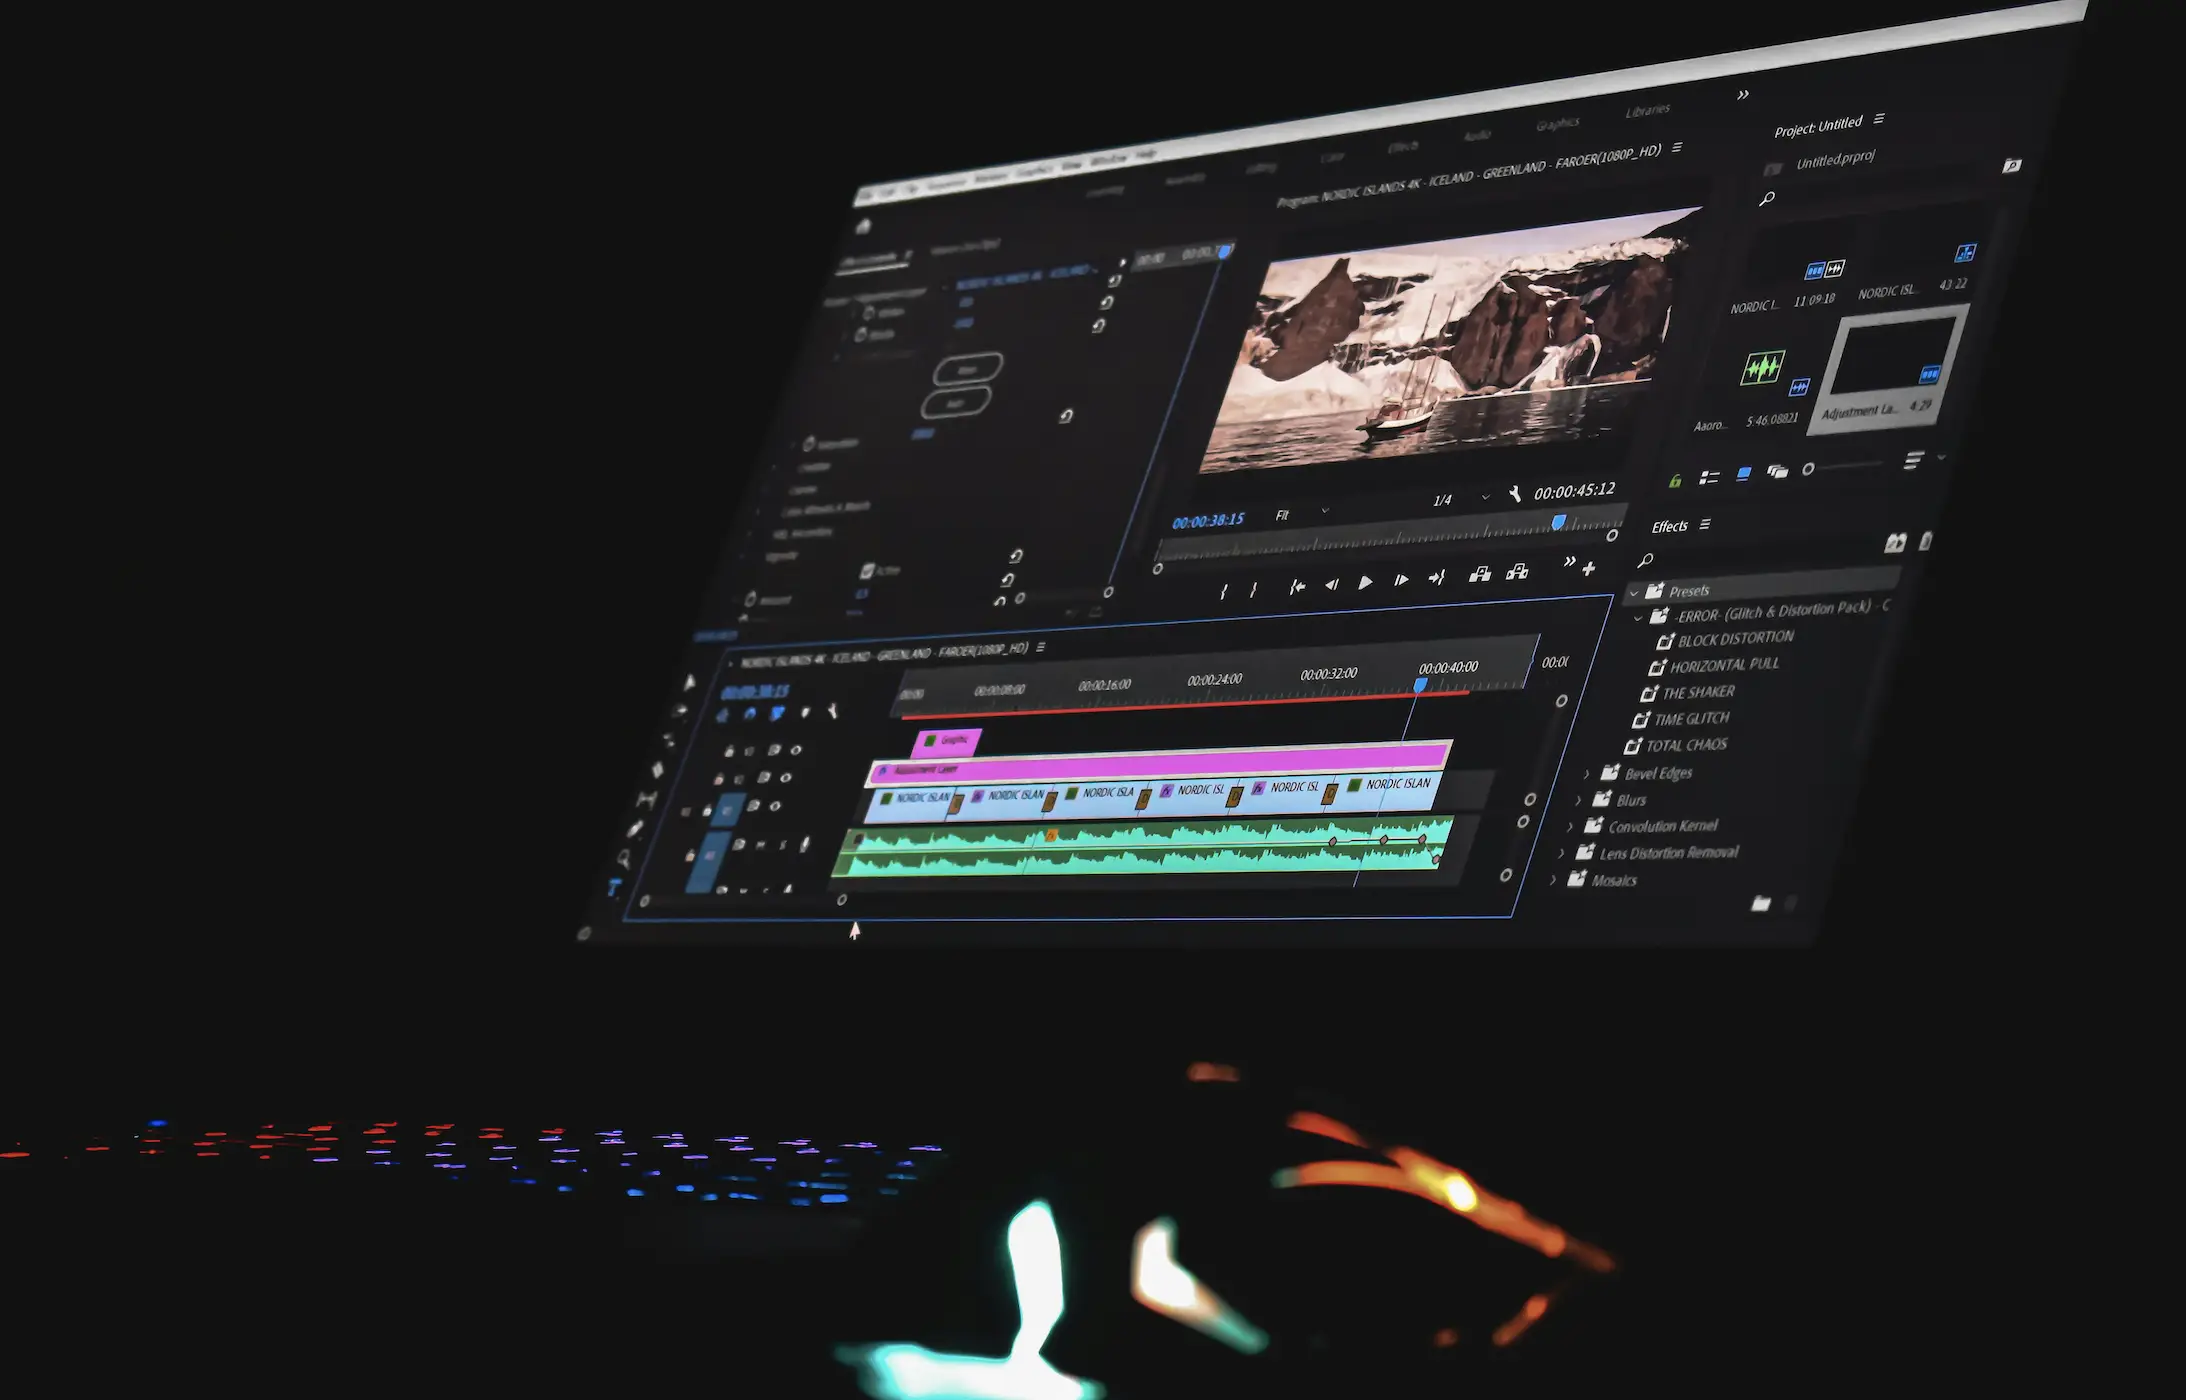 2K Resolution Is Popular For Editing Video